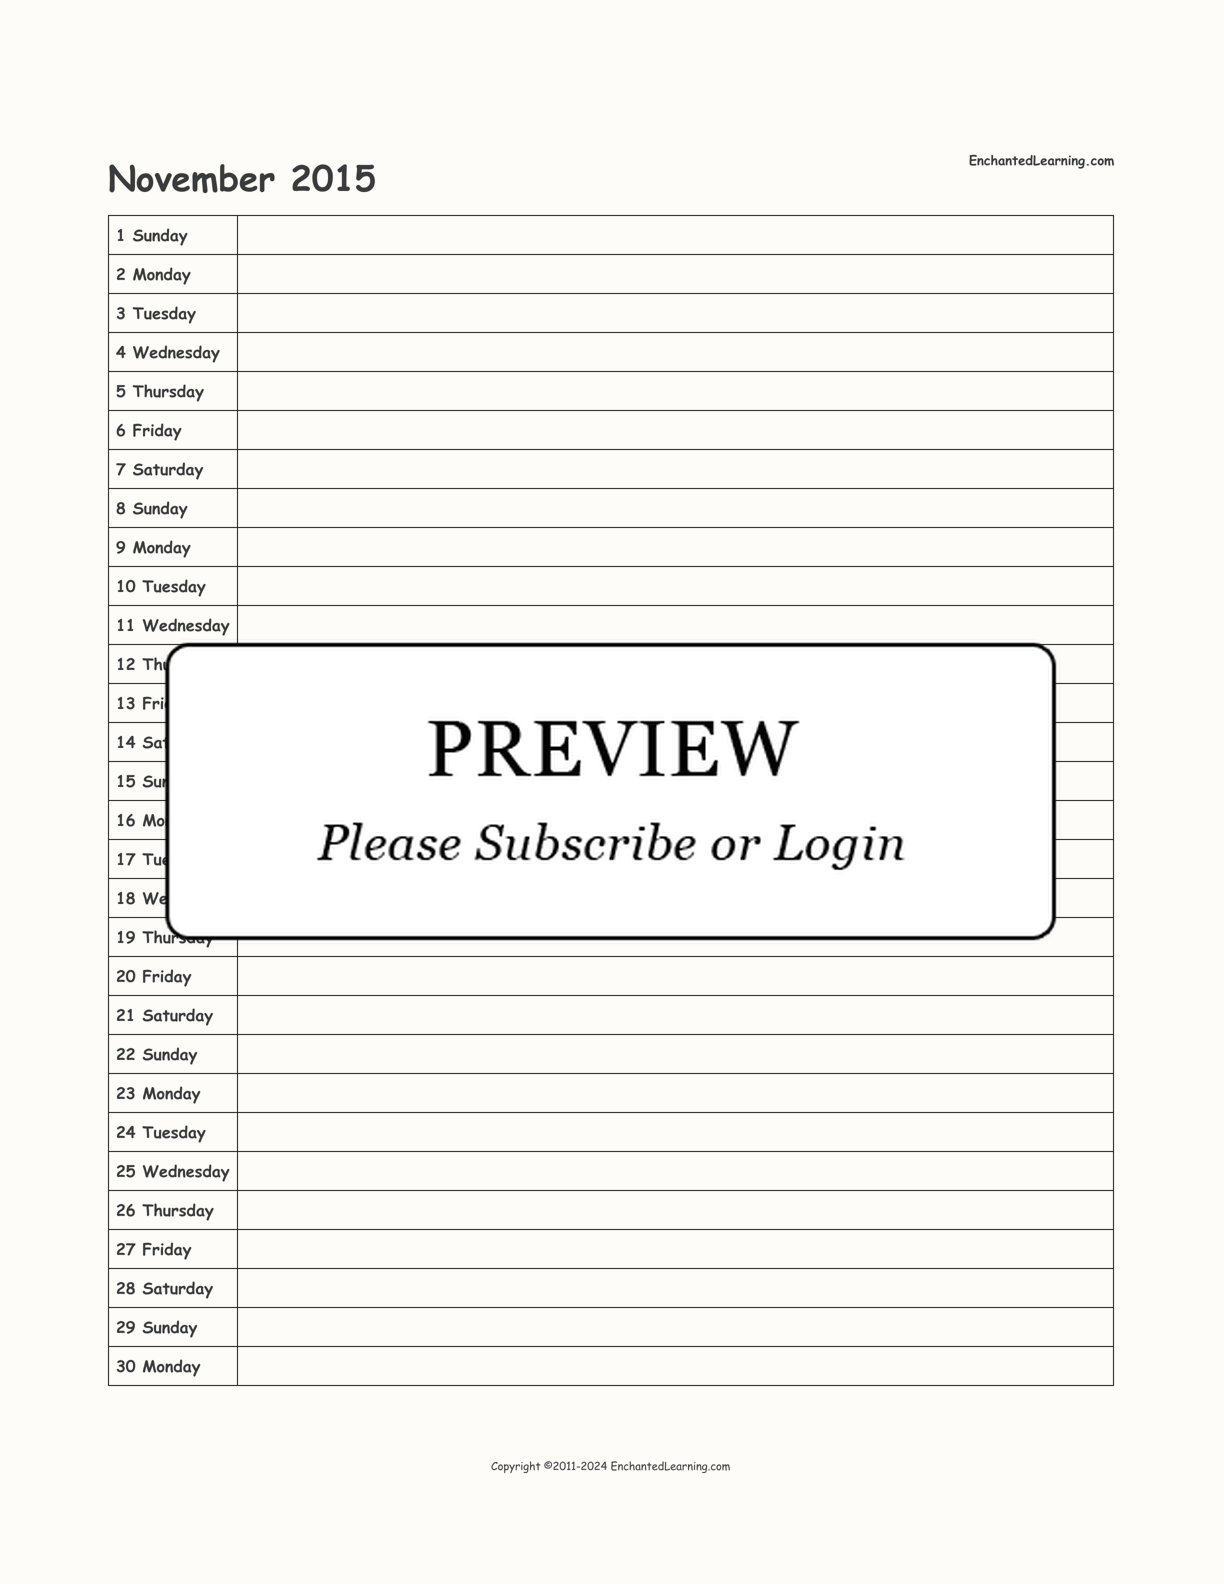 2015 Scheduling Calendar interactive printout page 11